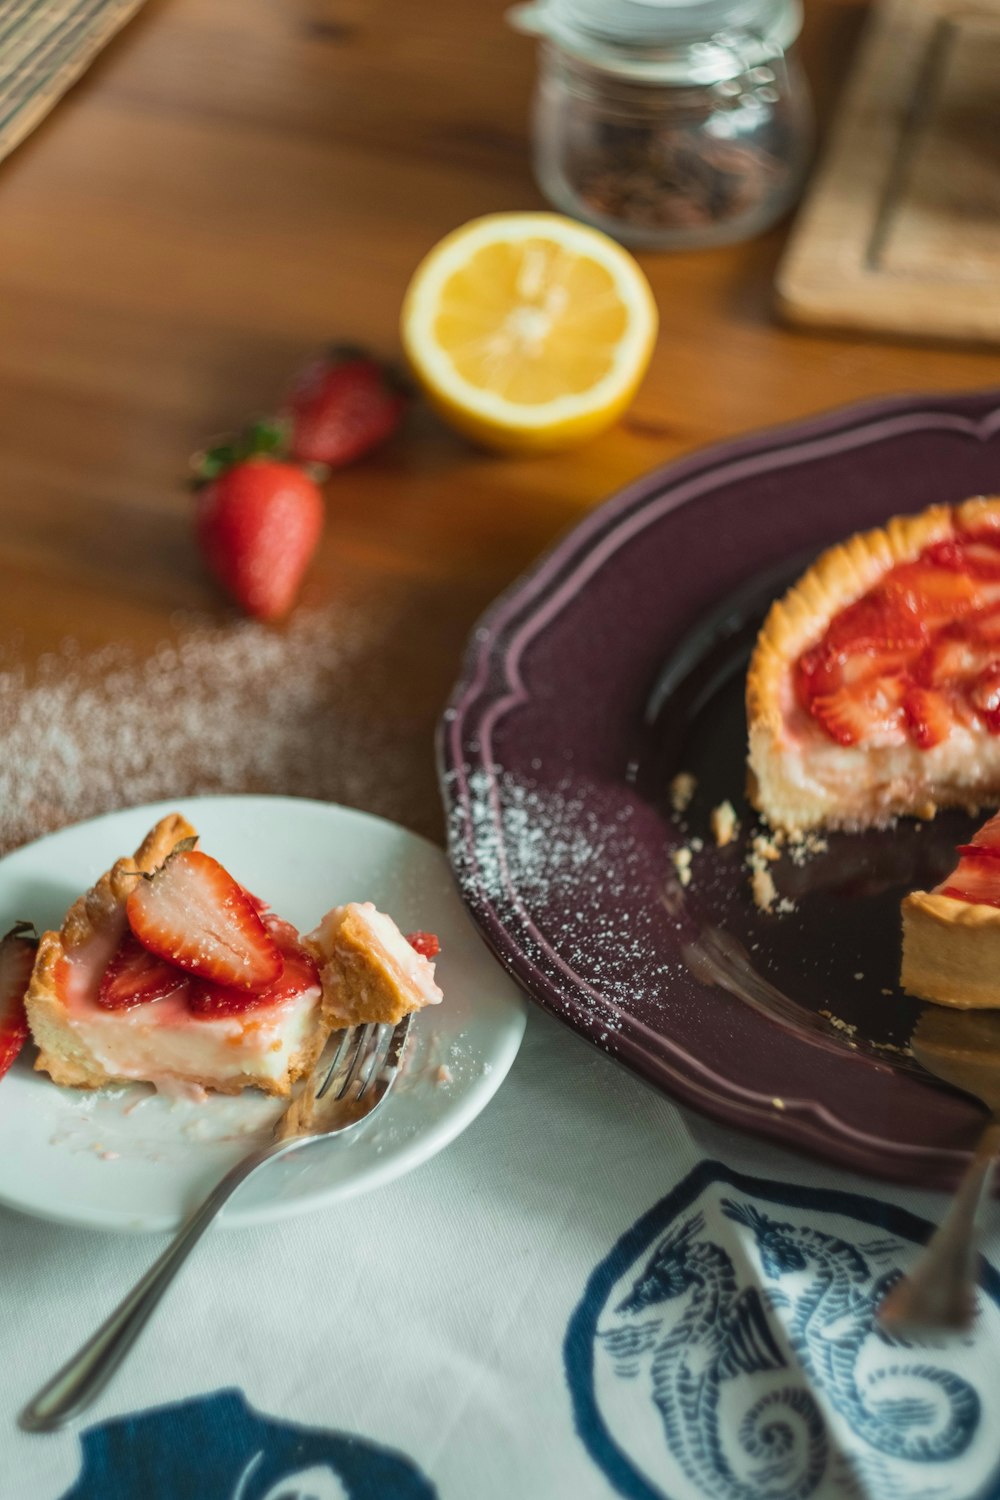 strawberry pie slice on saucer beside plate plate with pie